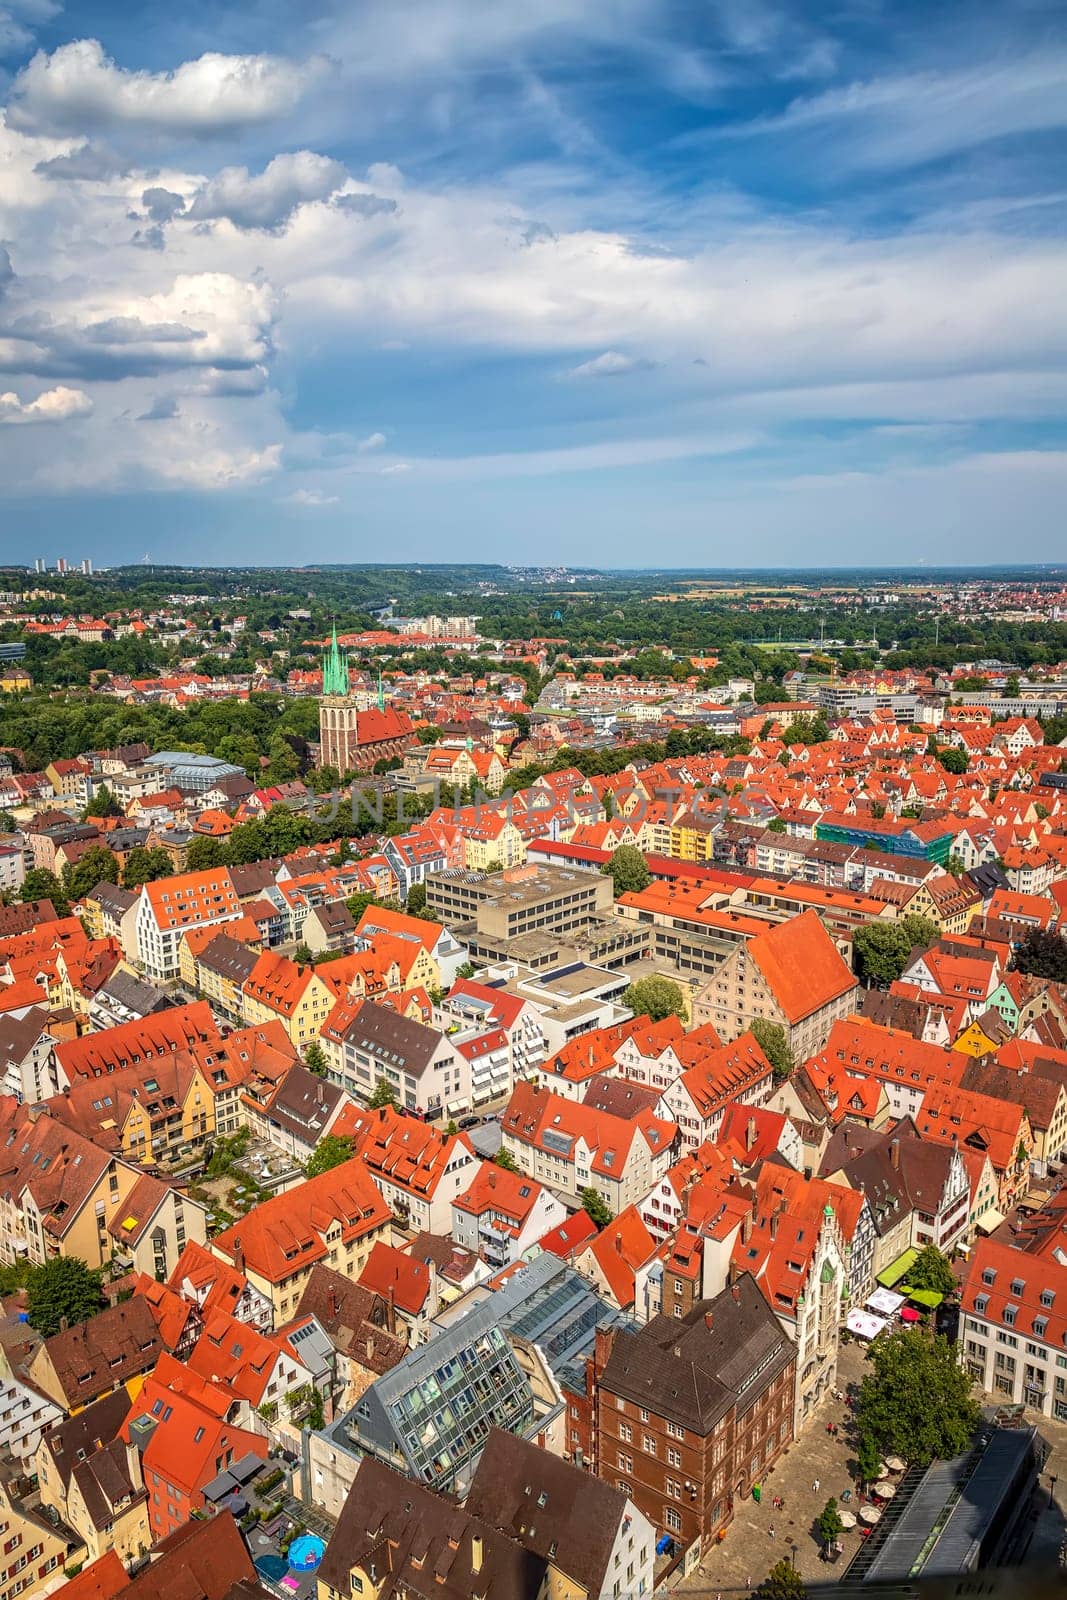 View of the red roofs of the city from above, Ulm, Germany by EdVal